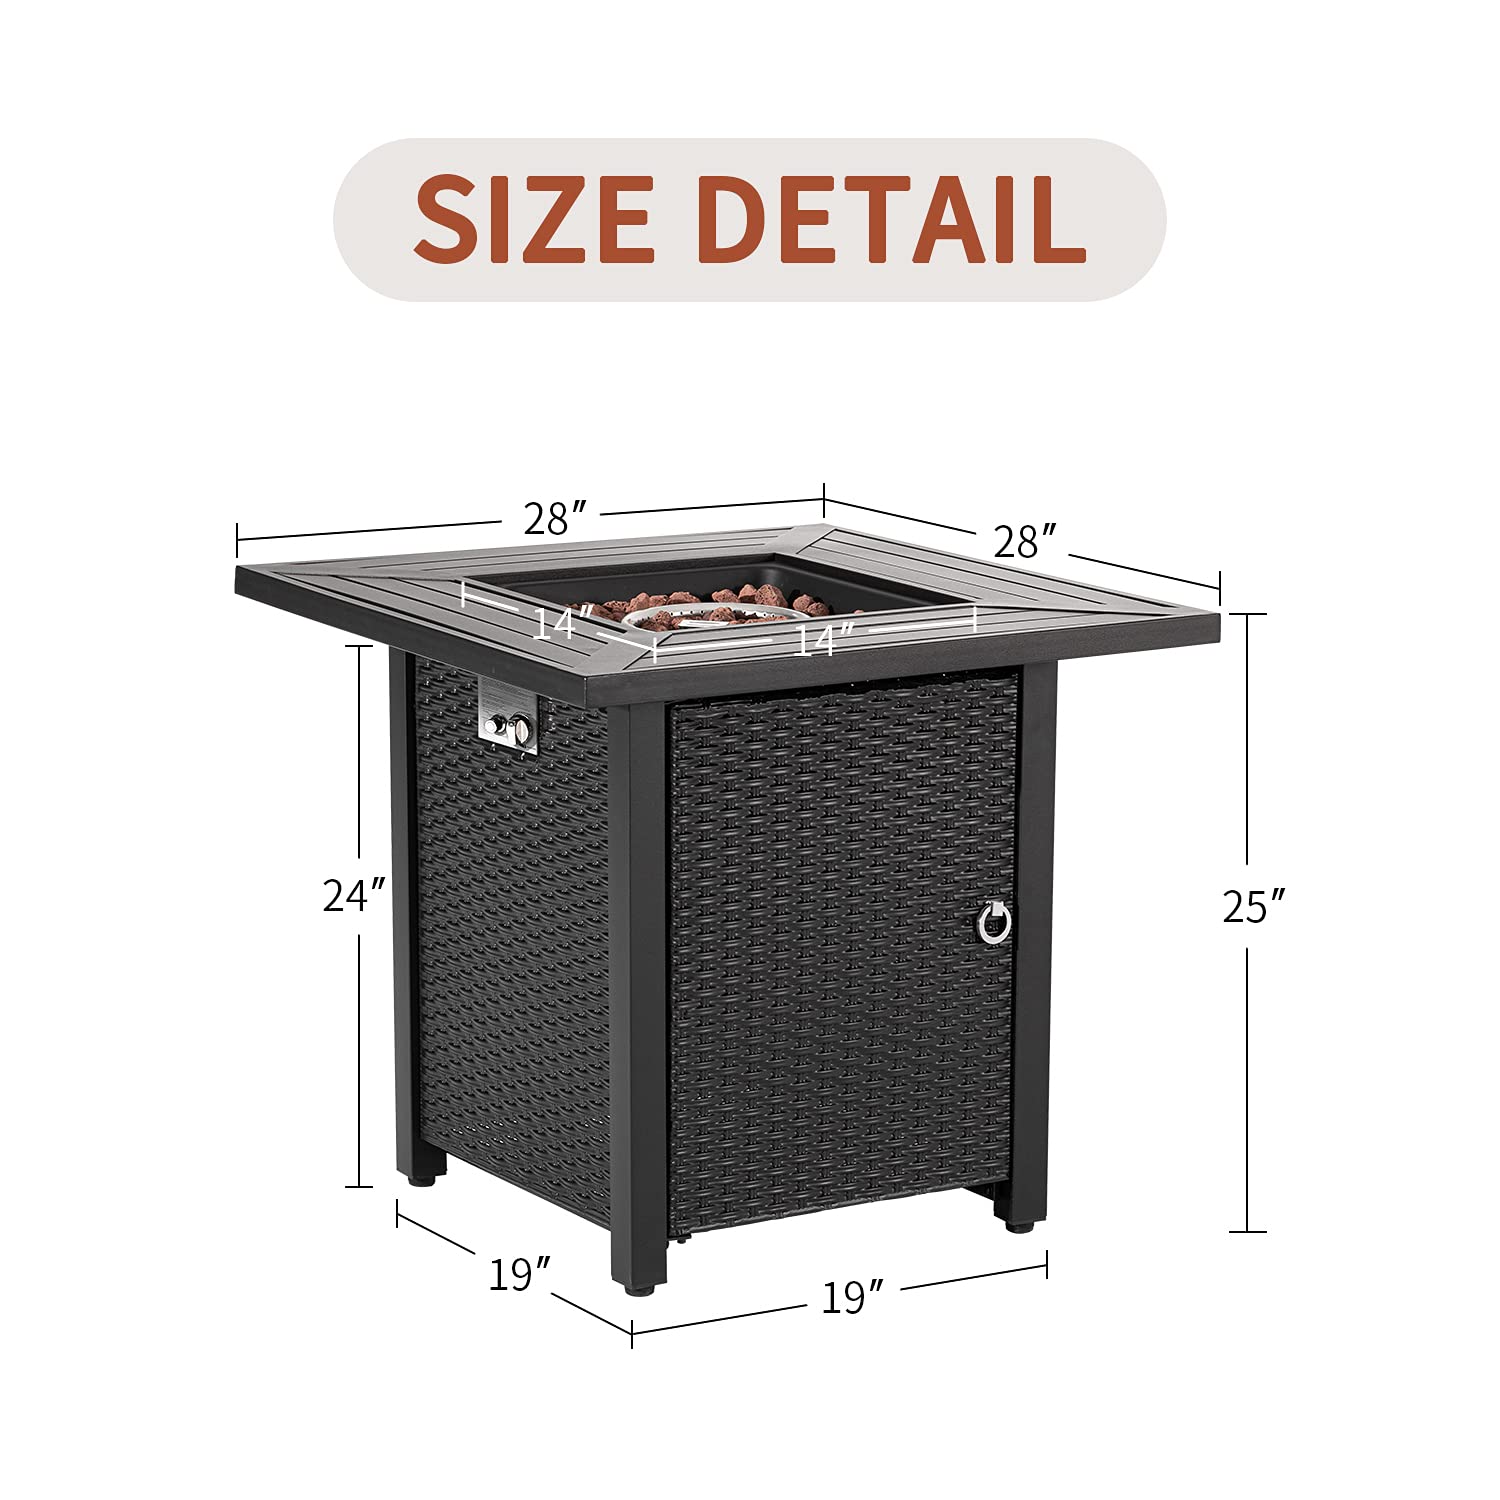 SUNBURY Outdoor Propane Fire Pit Table, 28 Inch Patio Gas Fire Table 40,000 BTU Auto-Ignition, Rattan-Look Outdoor Companion w Lid, Waterproof Cover, Lava Rocks (Black Brown)